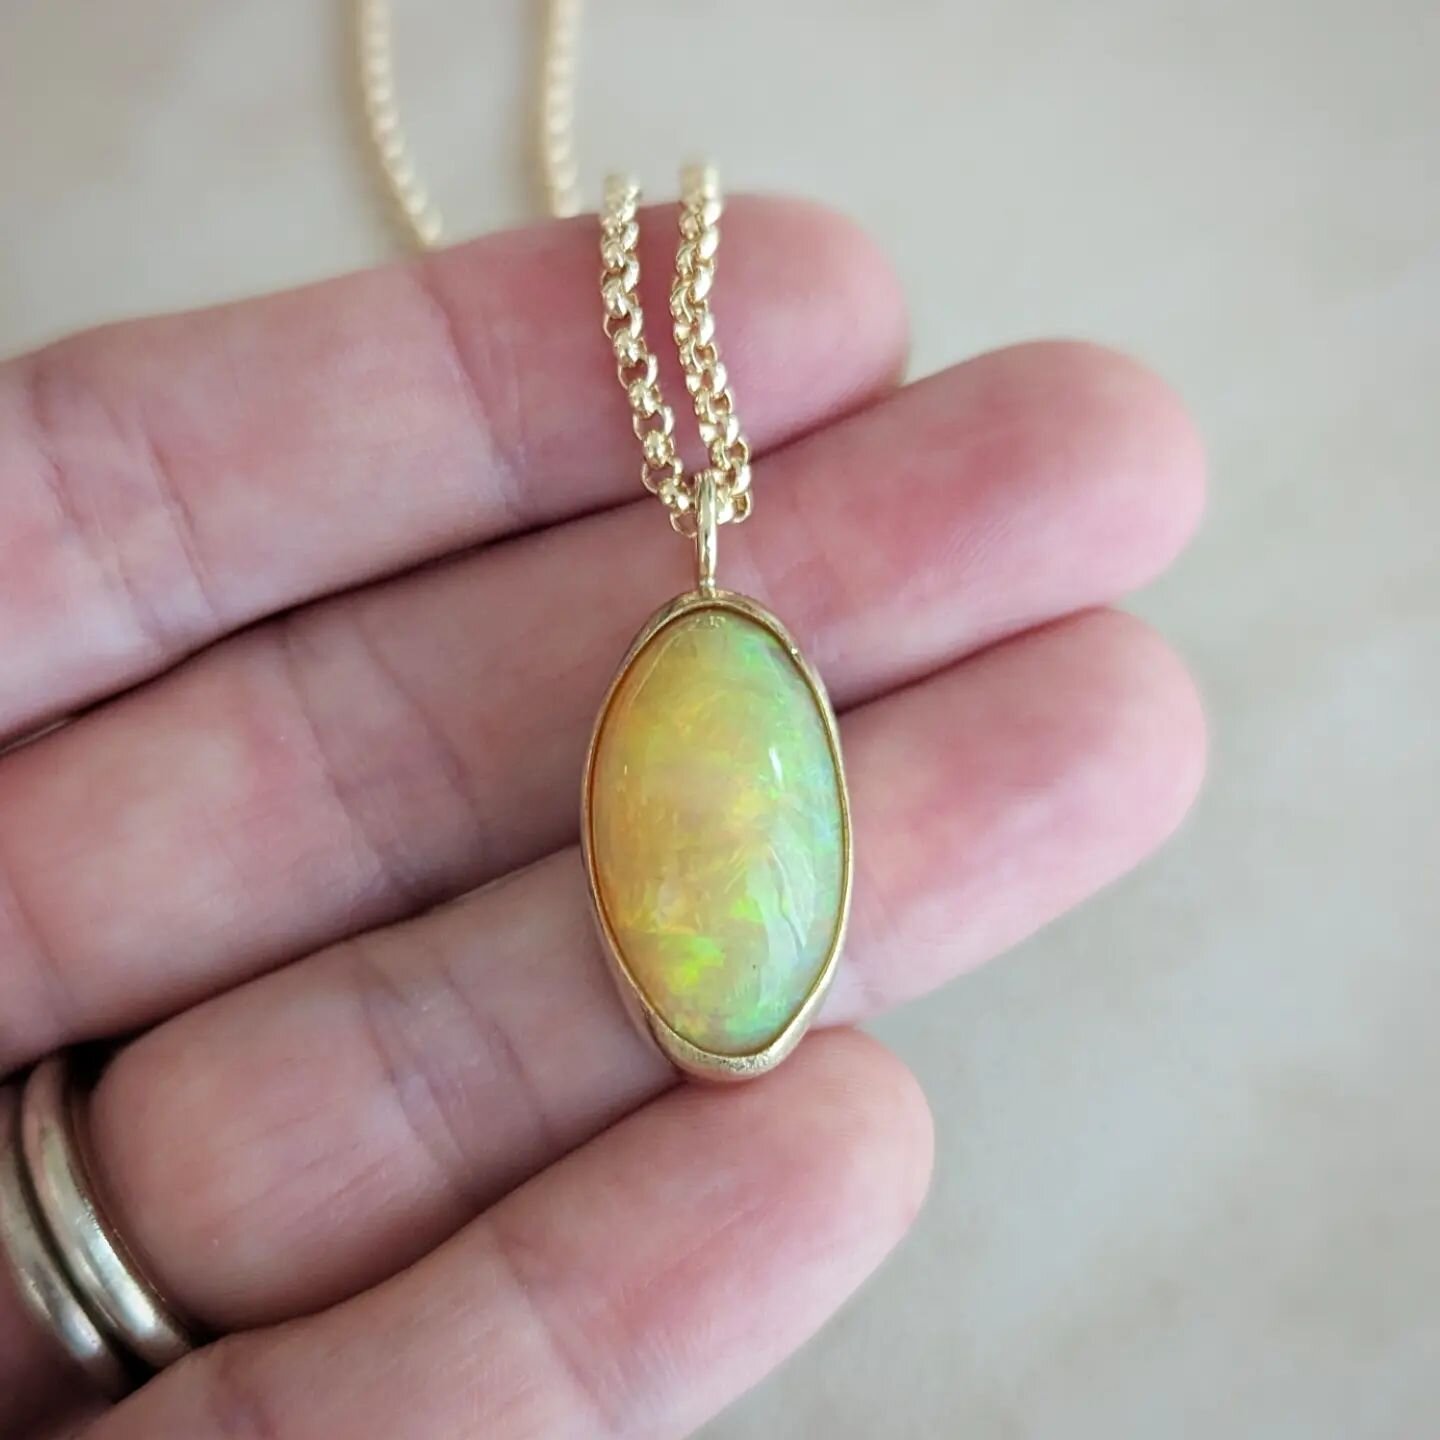 I had the amazing honor to work with this client's absolutely beautiful Ethiopian Opal ✨
She got this stone from her dad and we just needed to make it wearable. Keeping the 14K gold setting simple to showcase how incredible this stone is and a sturdy